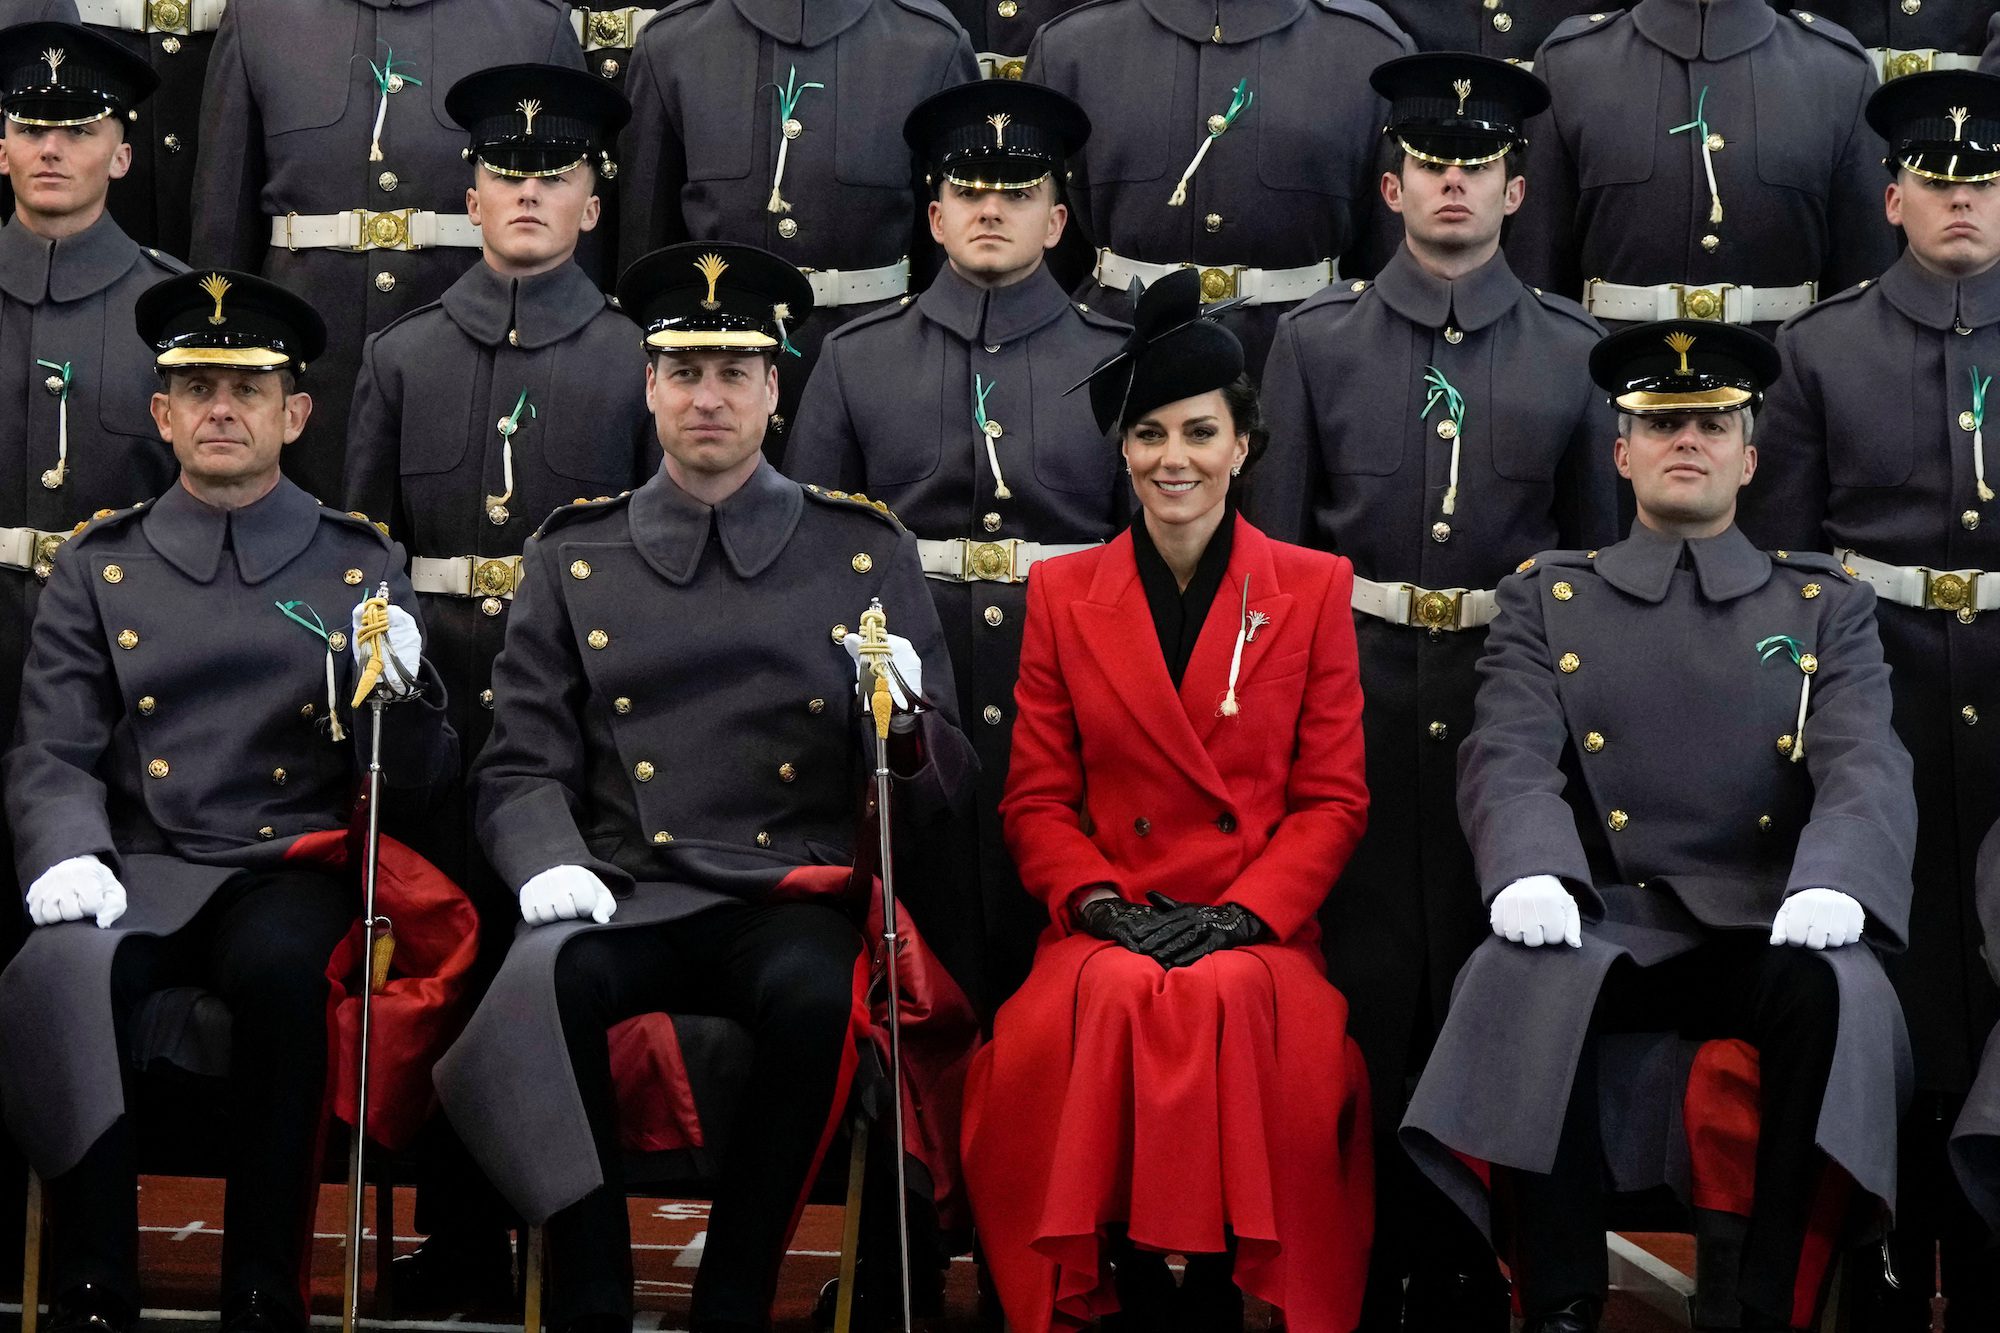 Britain's Prince William and Catherine, Princess of Wales sit for an official photo with The Prince of Wales's company at a St David's Day parade with members of the 1st Battalion, The Welsh Guards in Windsor, Britain, March 1, 2023. It is the first time The Prince has visited the Welsh Guards since becoming Colonel of the Regiment. Alastair Grant/Pool via REUTERS